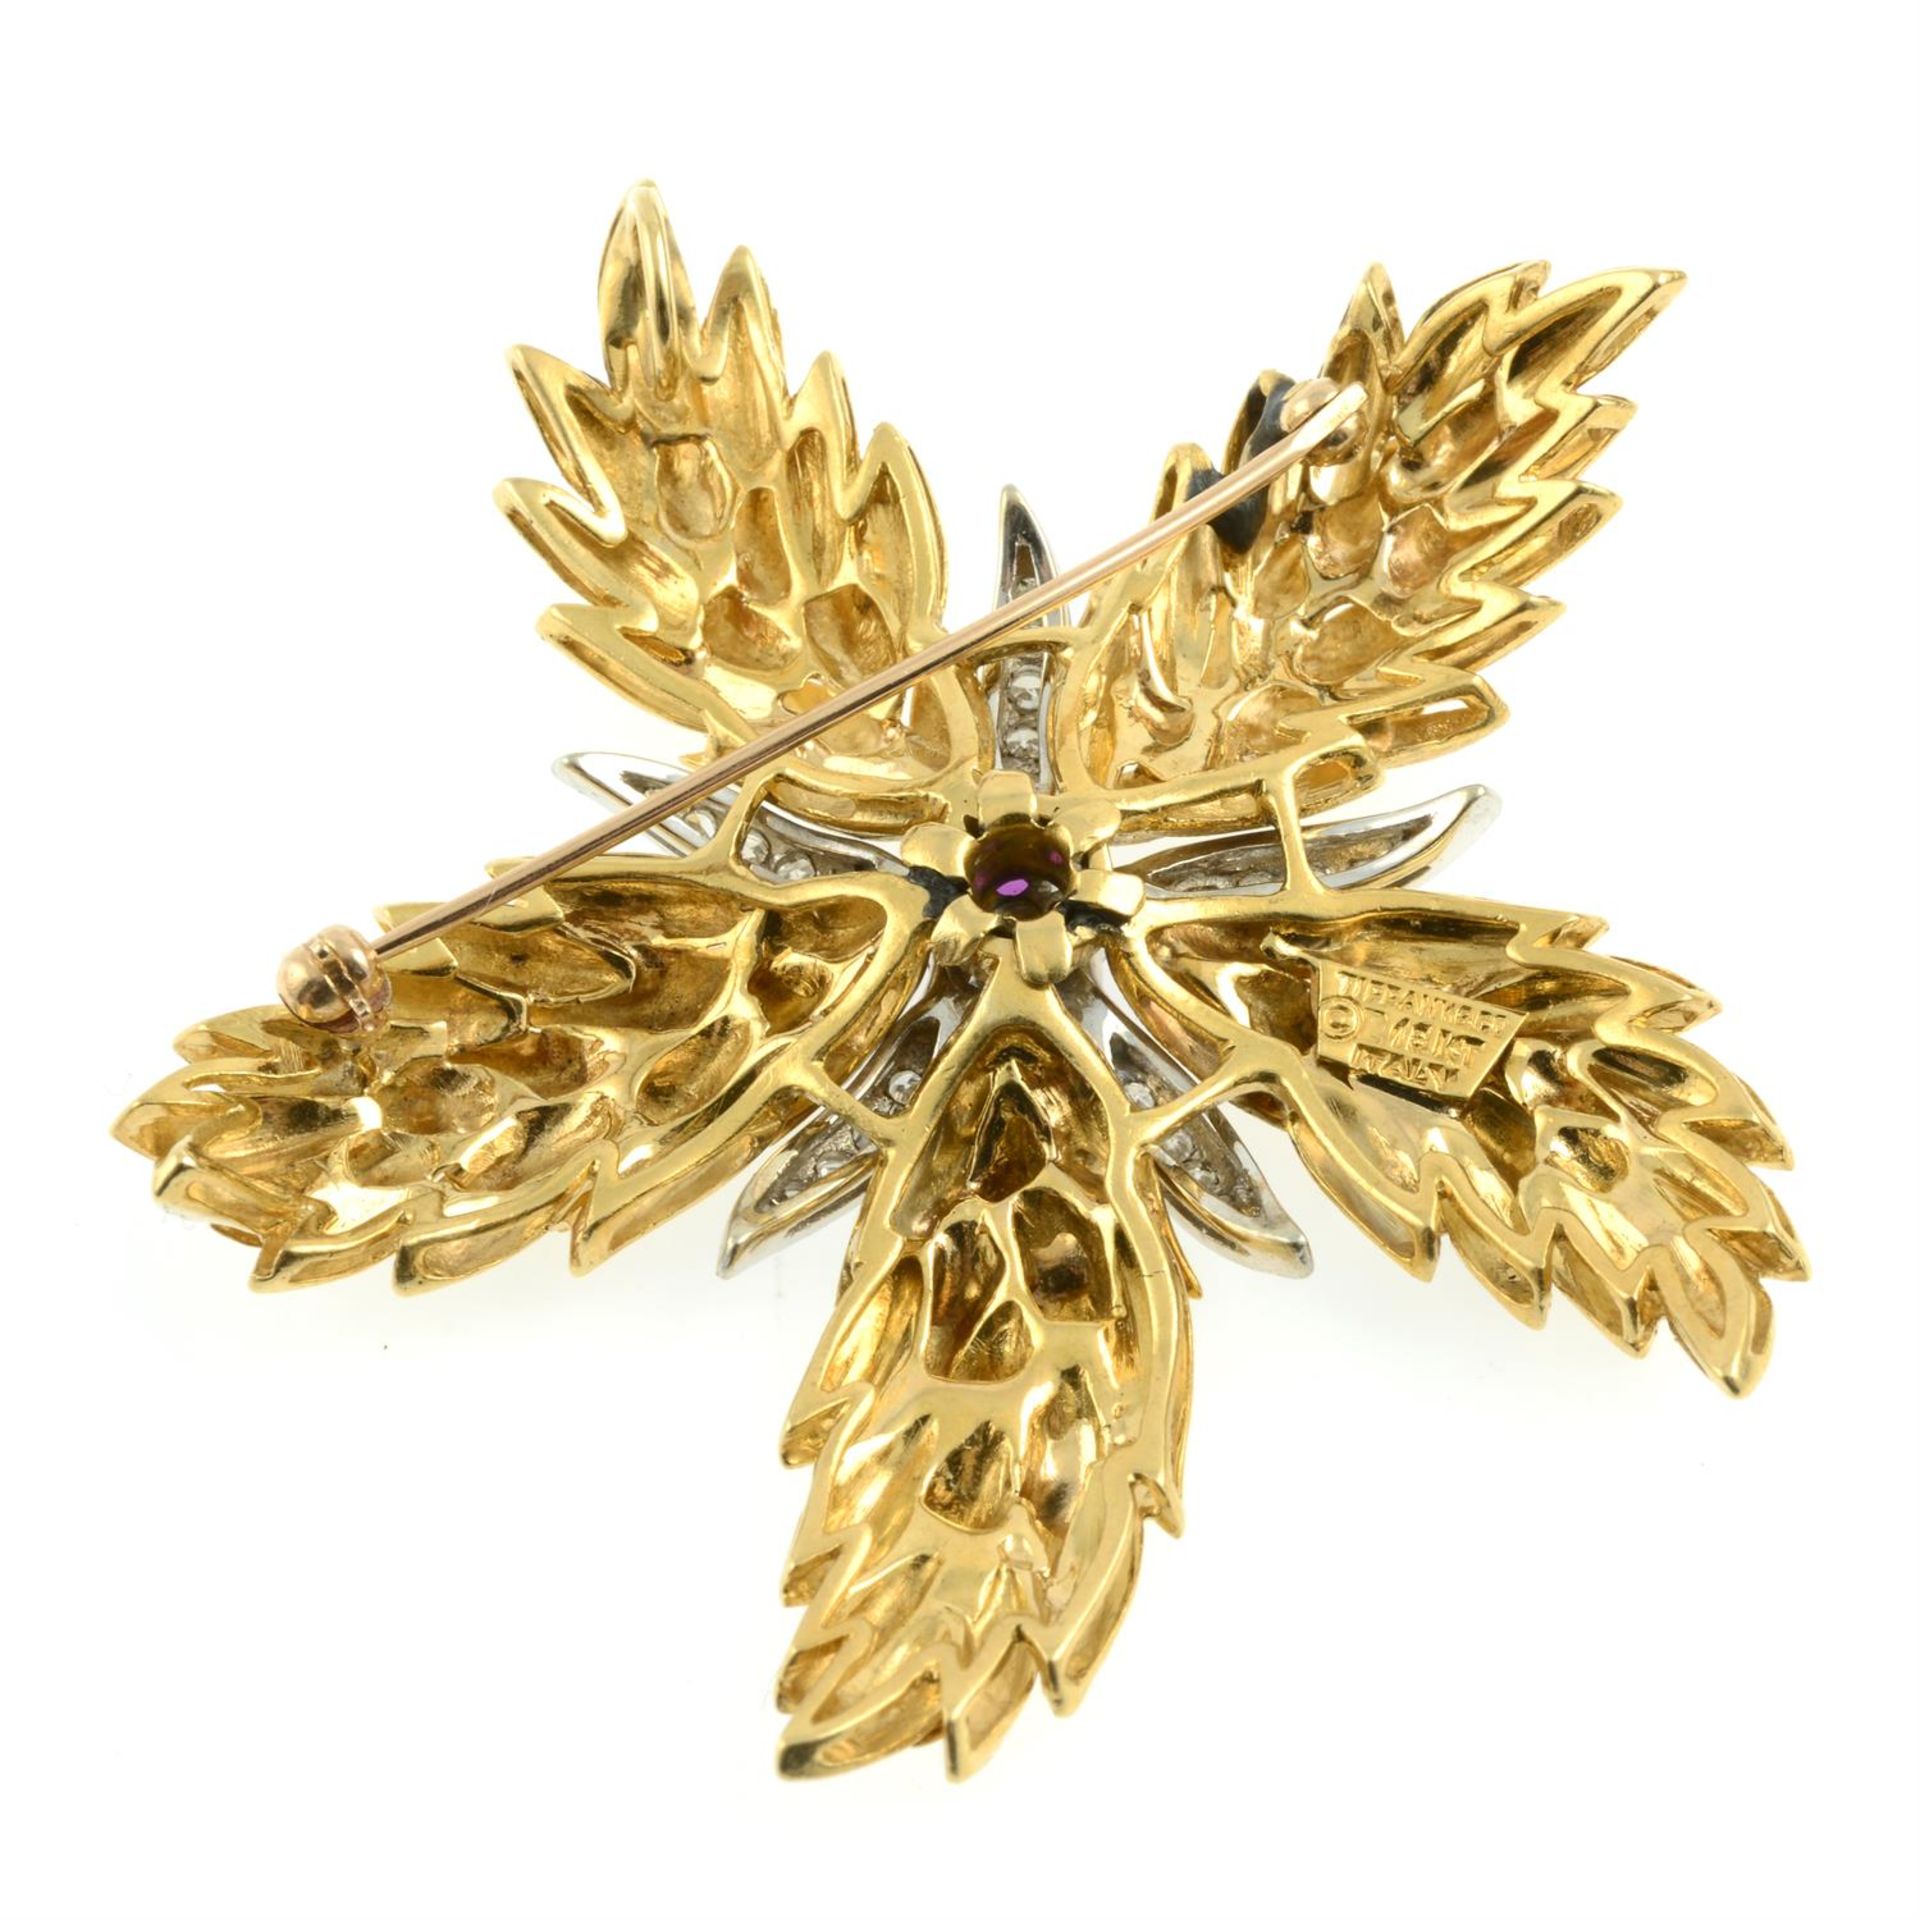 A mid 20th century 18ct gold brilliant-cut diamond and ruby floral brooch/pendant, by Tiffany & Co. - Image 3 of 4